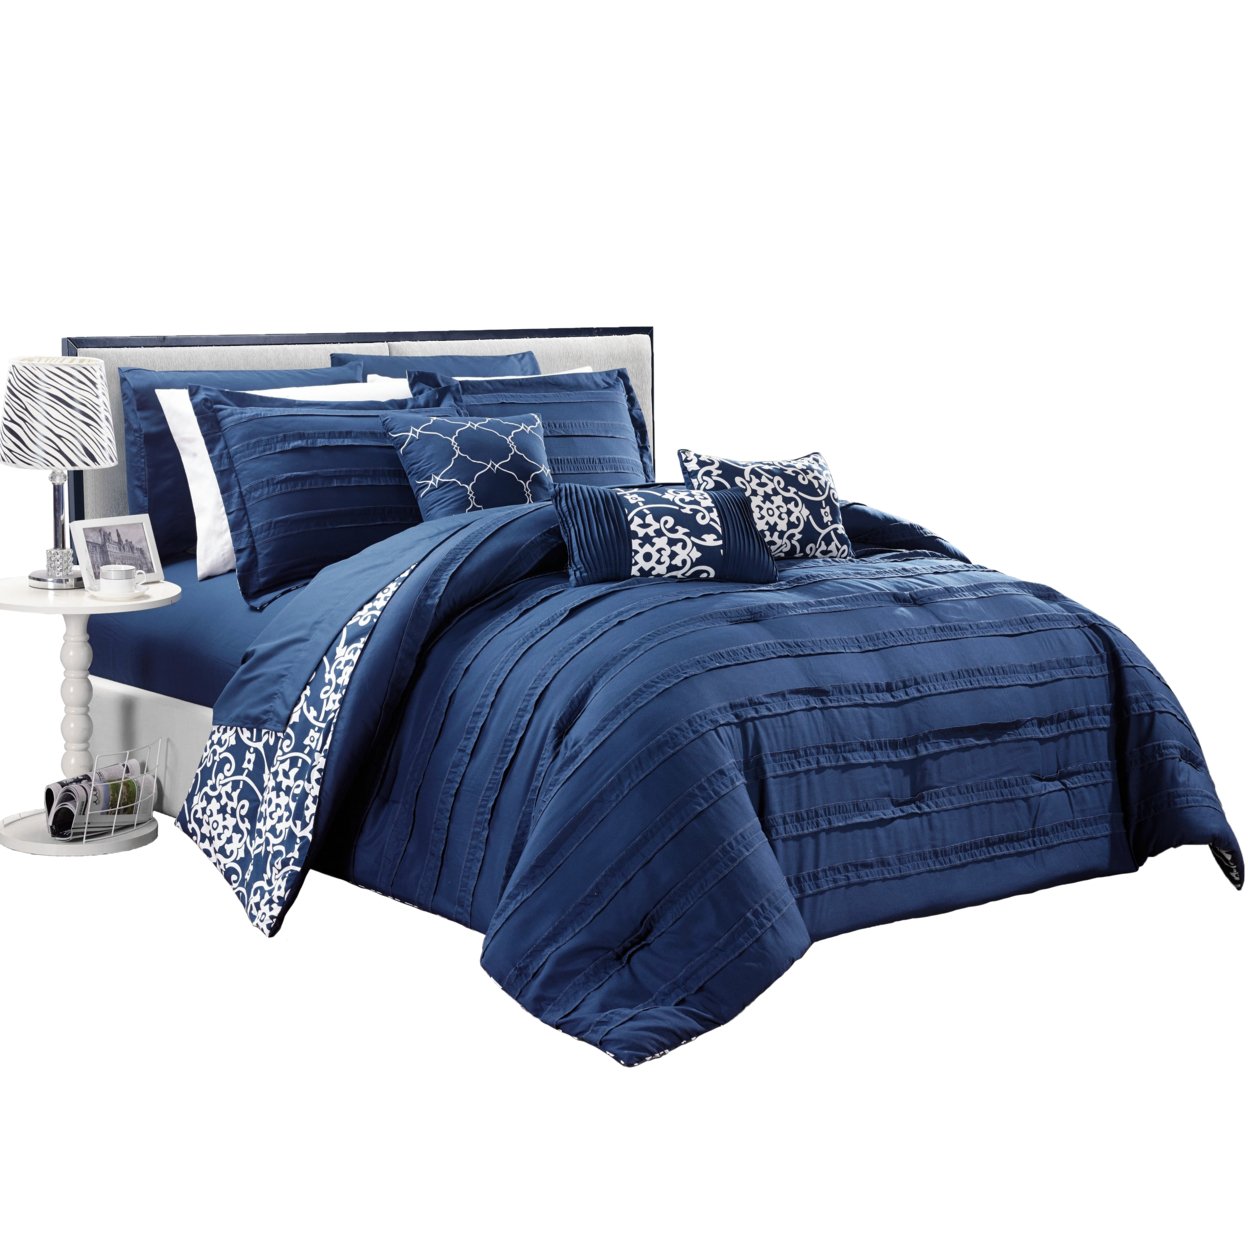 10-Piece Reversible Bed In A Bag Comforter & Sheet Set, Multiple Colors - Navy, King